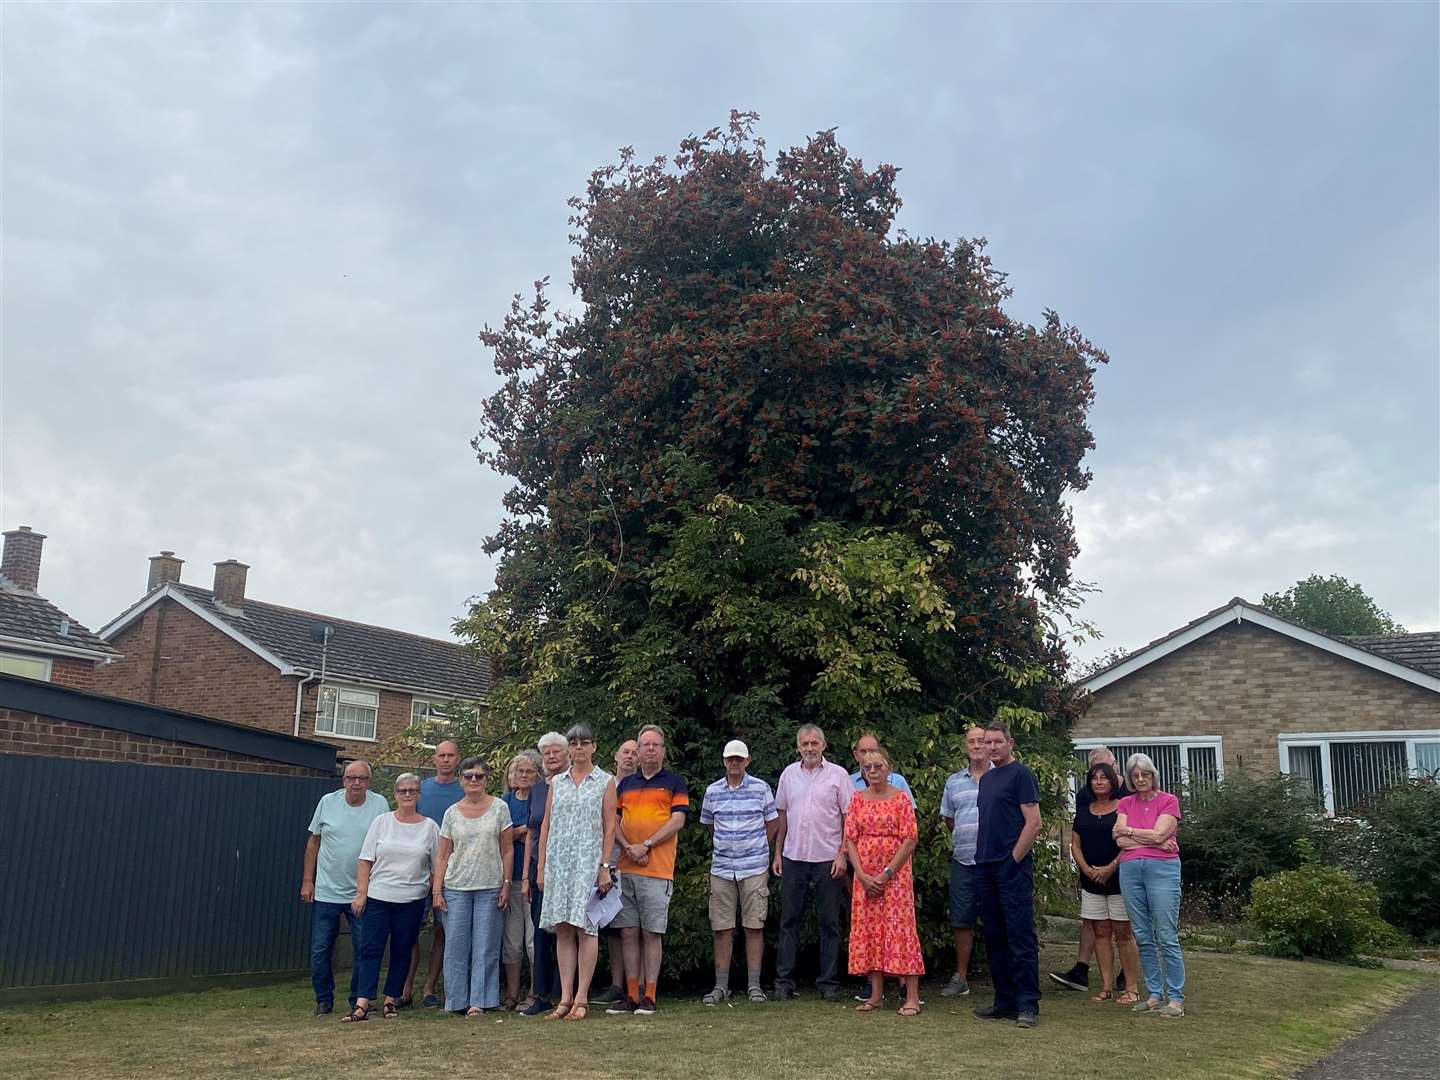 Plans to move the 20ft Swedish Whitebeam tree have proved controversial